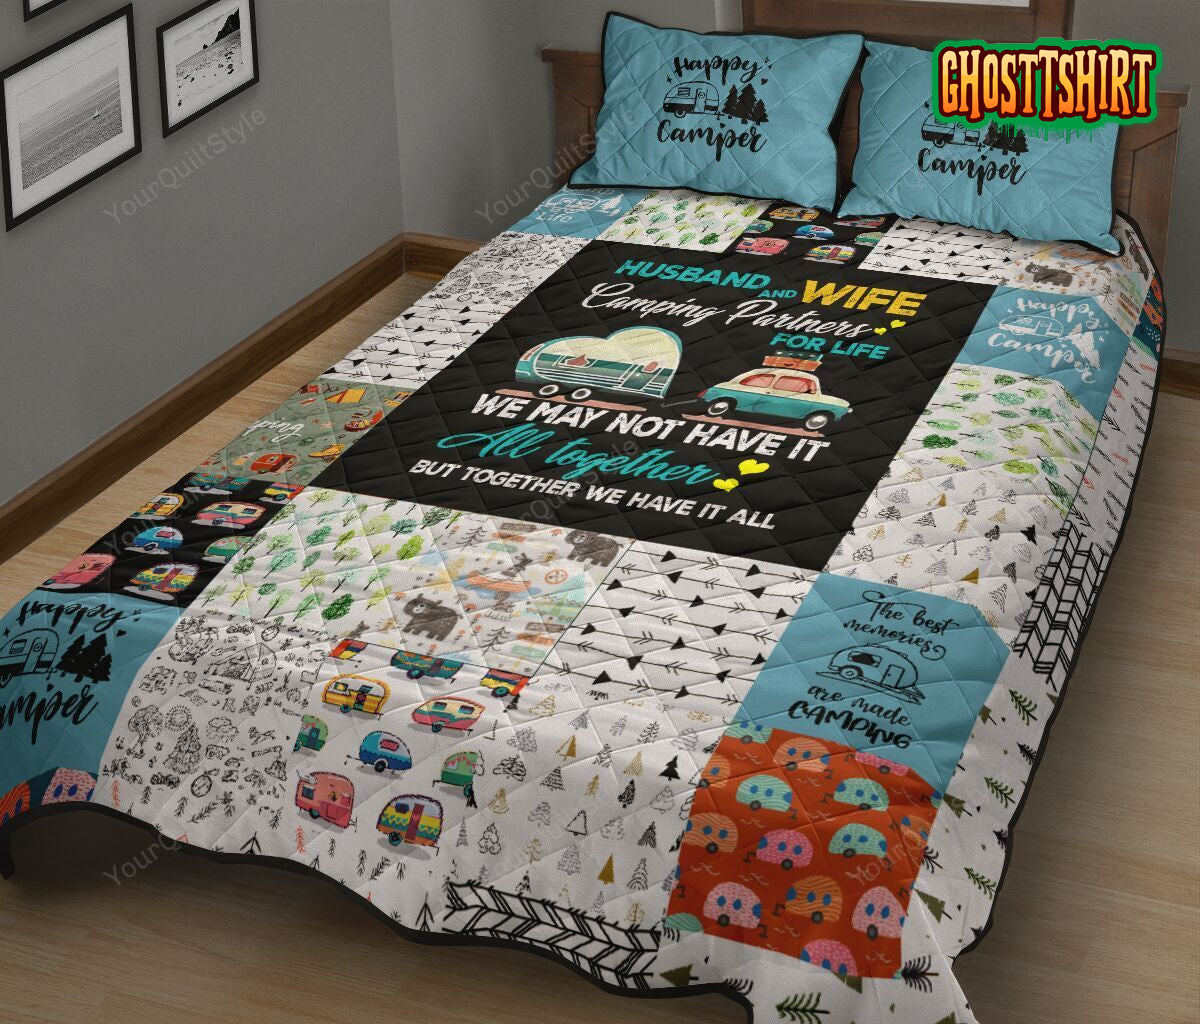 https://ghosttshirt.com/wp-content/uploads/2023/04/camping-partners-for-life-happy-campers-quilt-bedding-set-04way.jpg